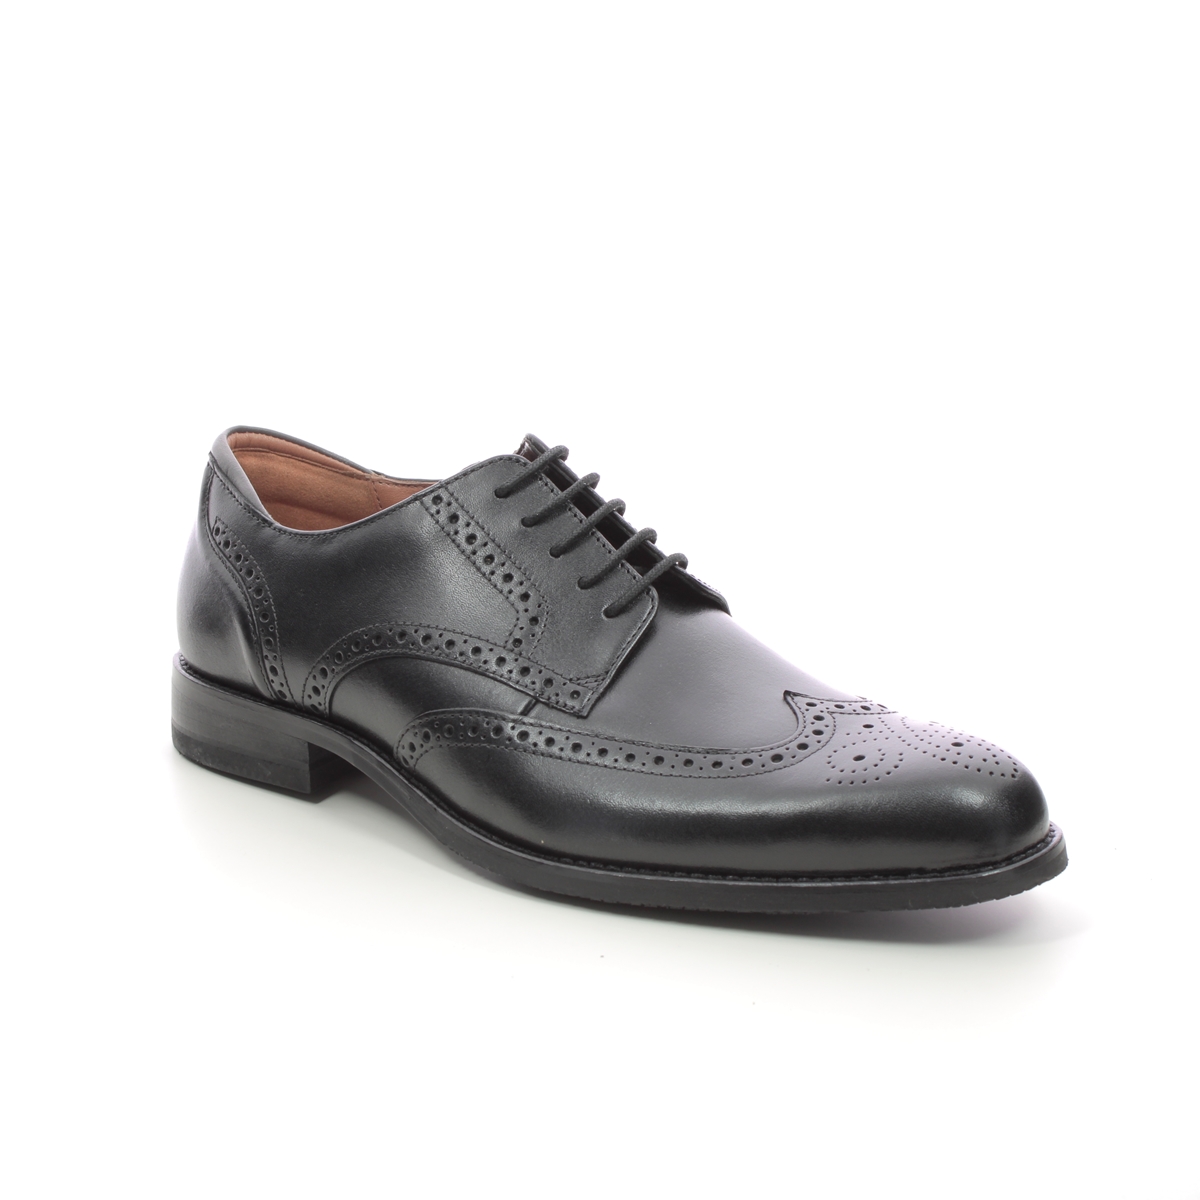 Clarks Craftarlo Limit Black leather Mens Brogues 7145-27G in a Plain Leather in Size 12